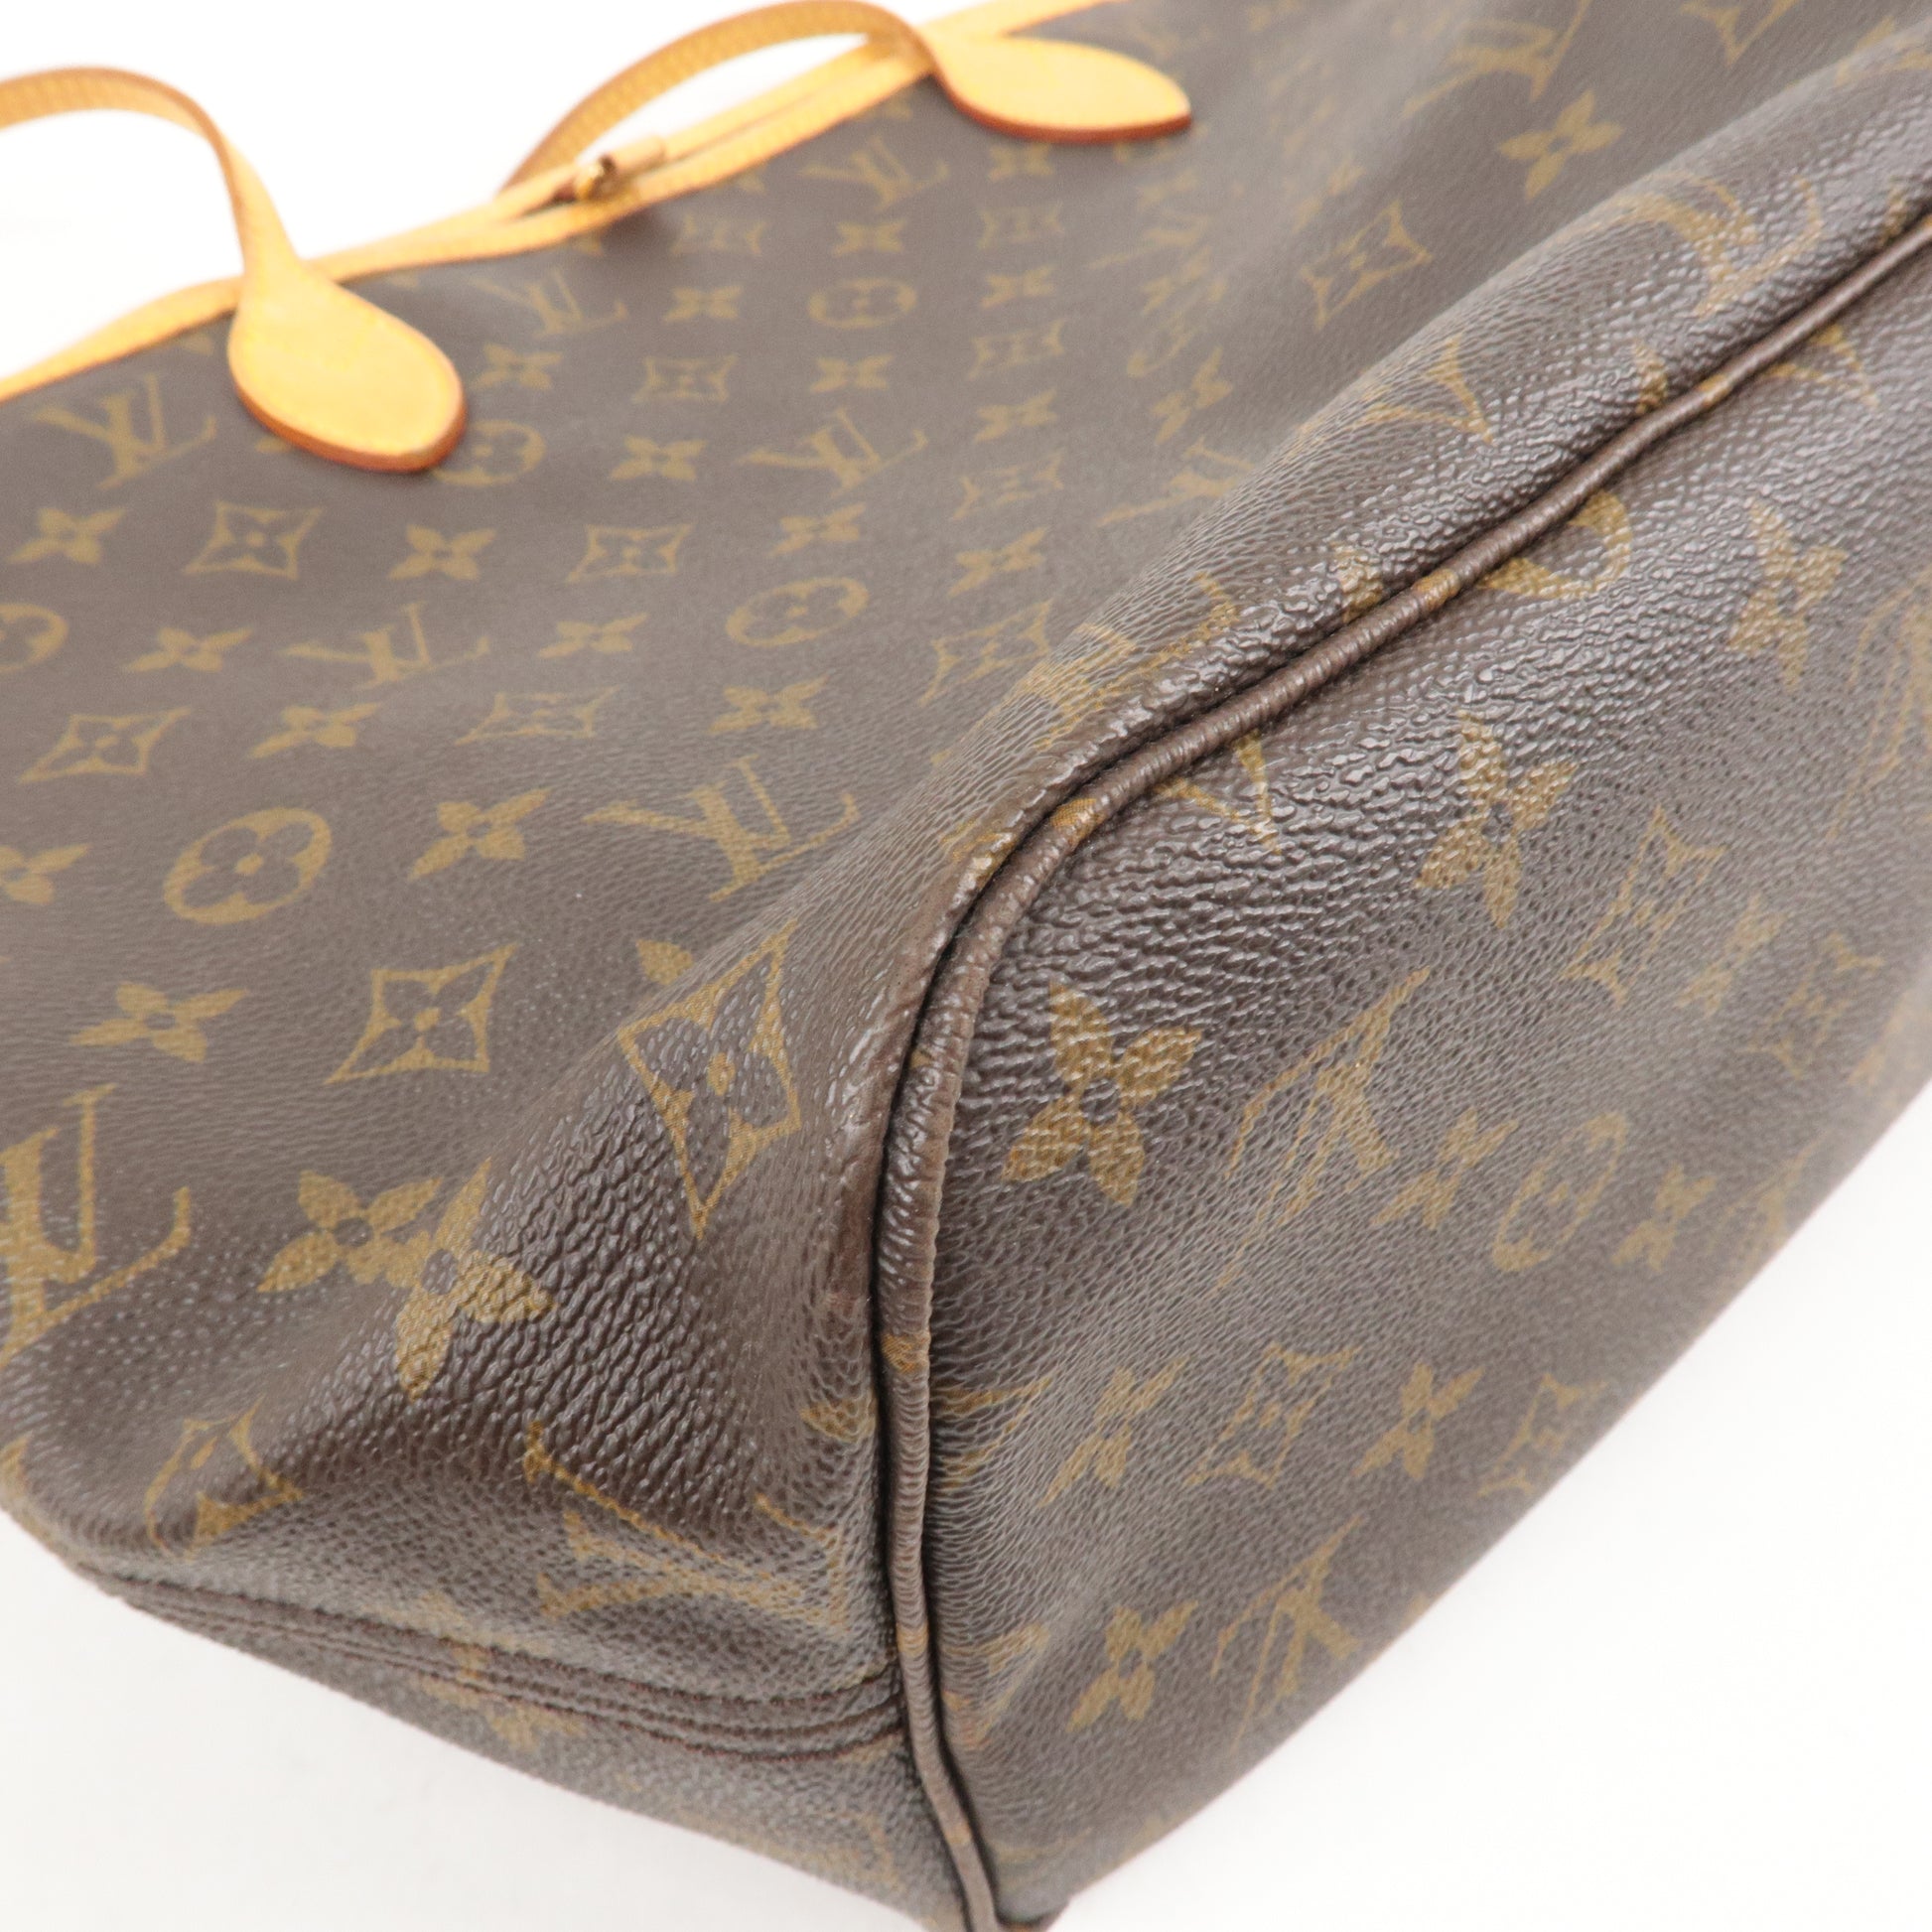 Buy Online Louis Vuitton-Neverfull MM Monogram-M40156 at Affordable Price